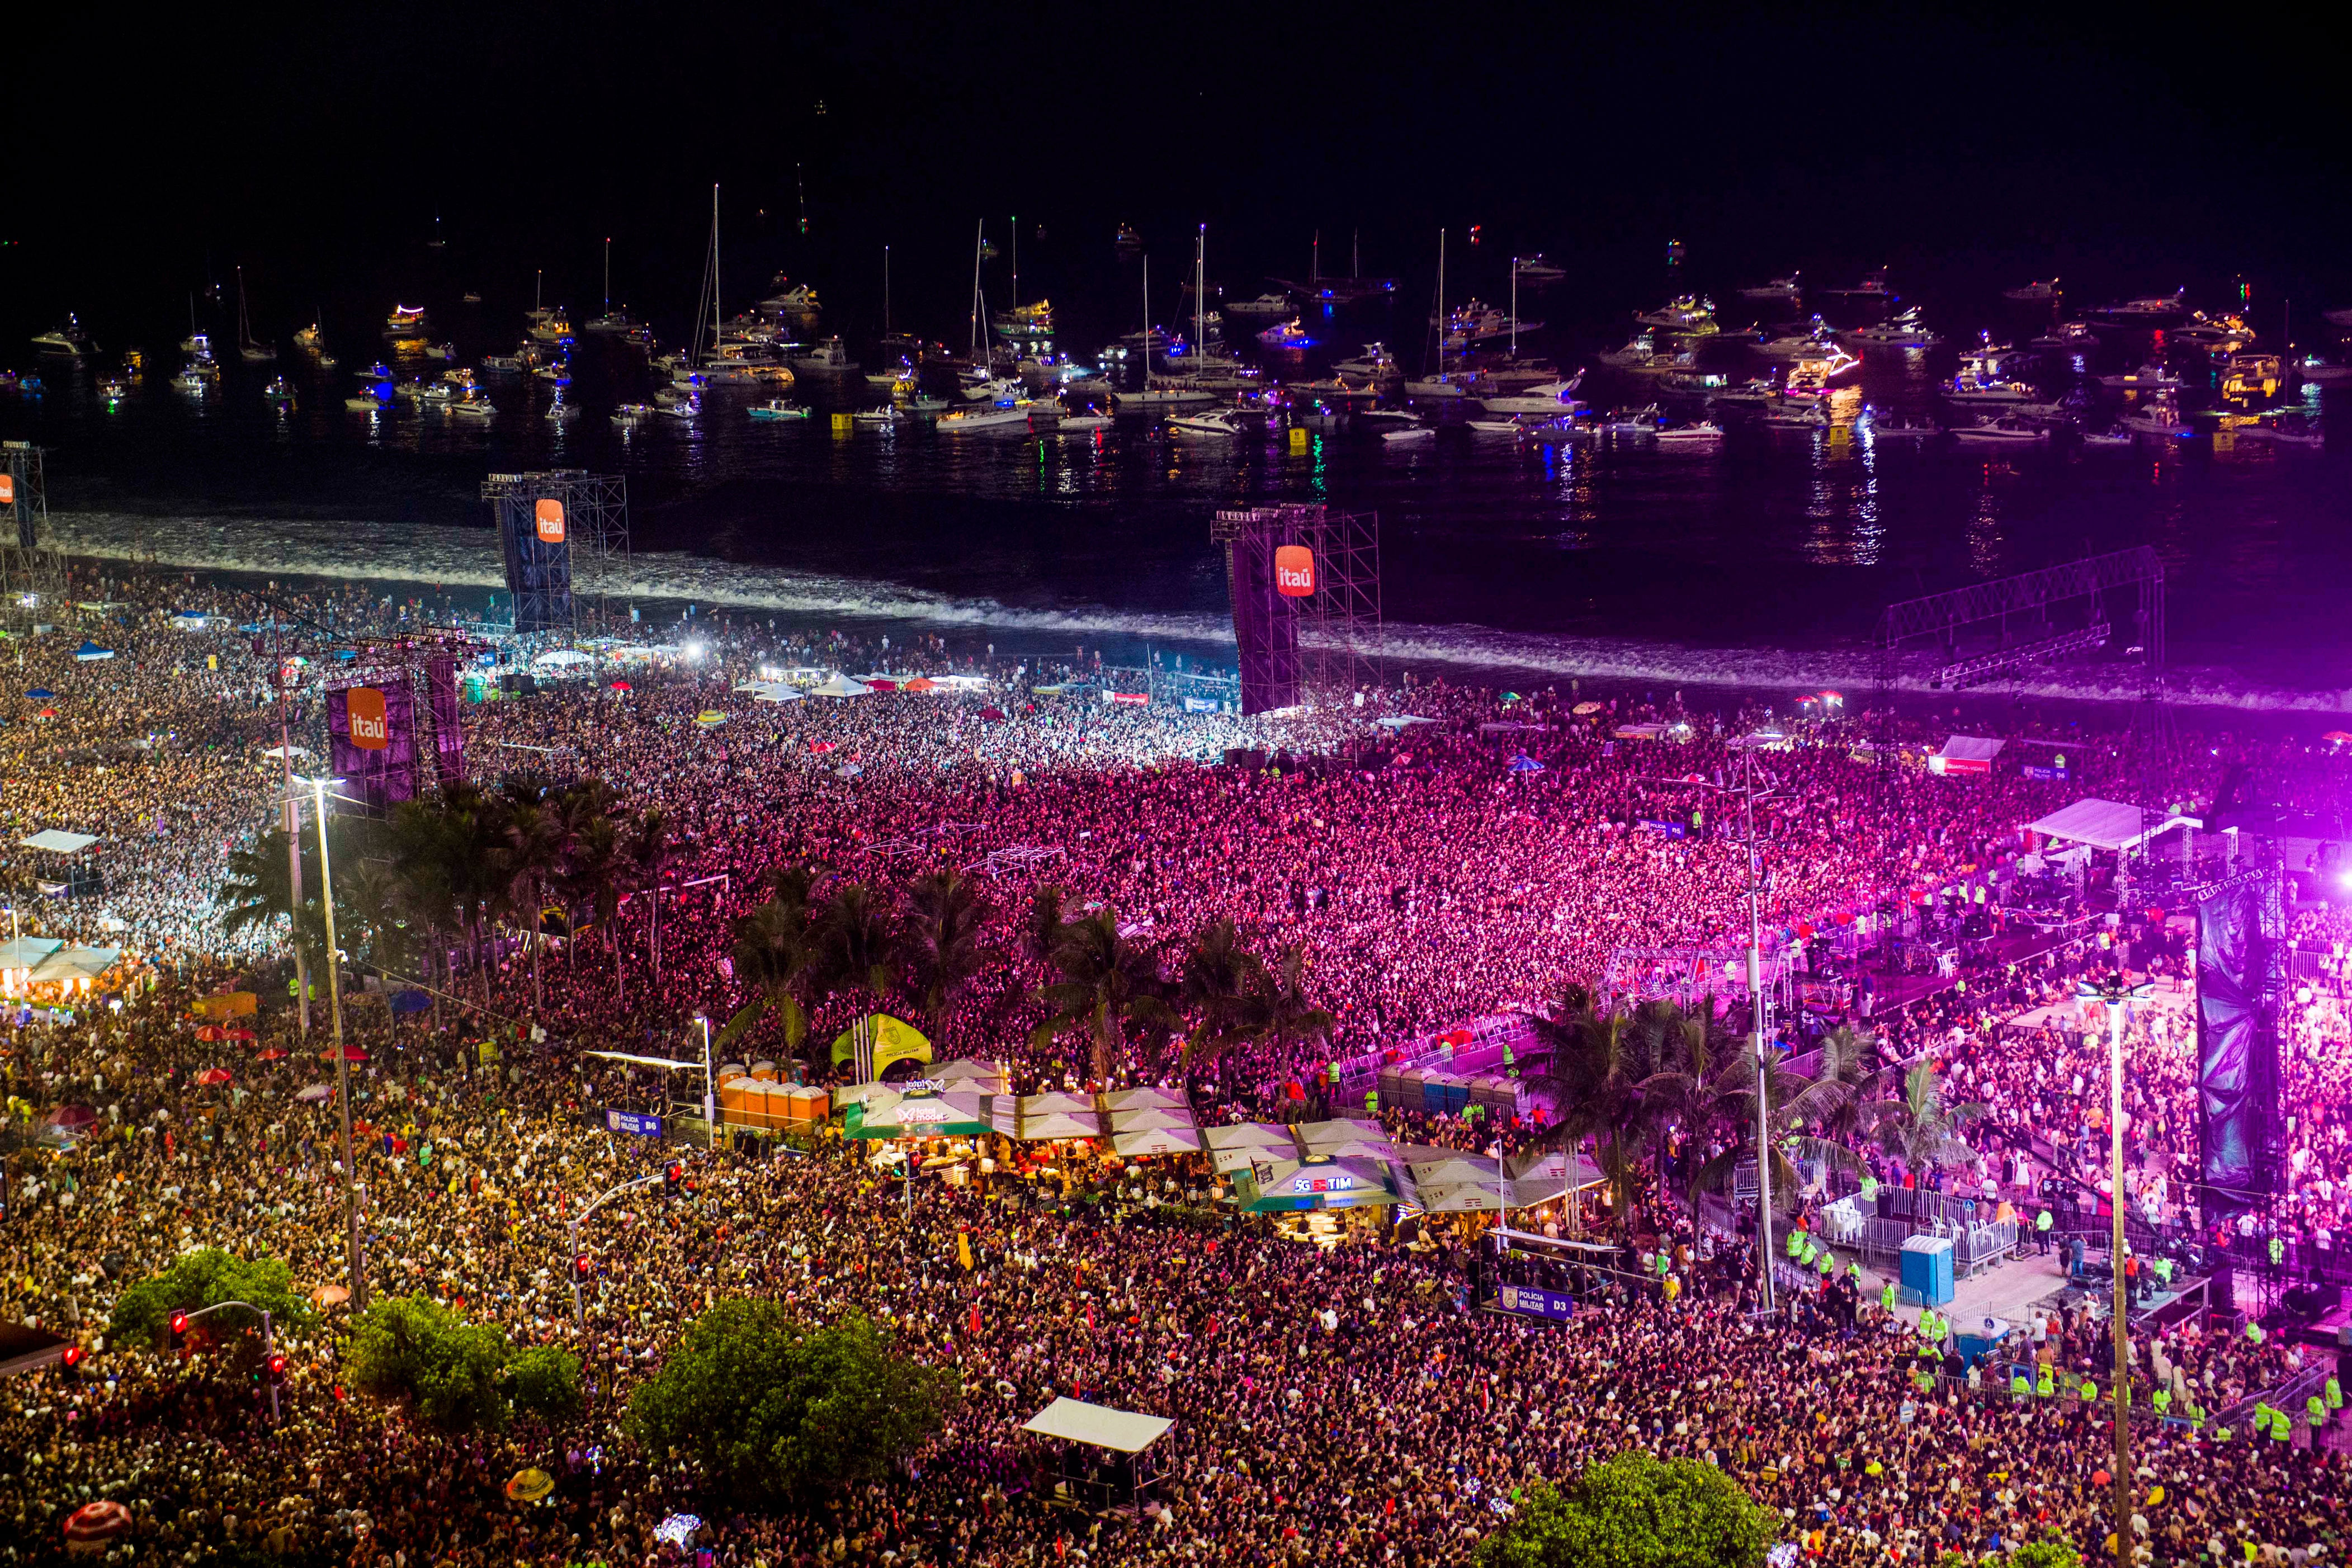 how to, madonna ends celebration tour with biggest ever show to over a million fans at rio’s copacabana beach